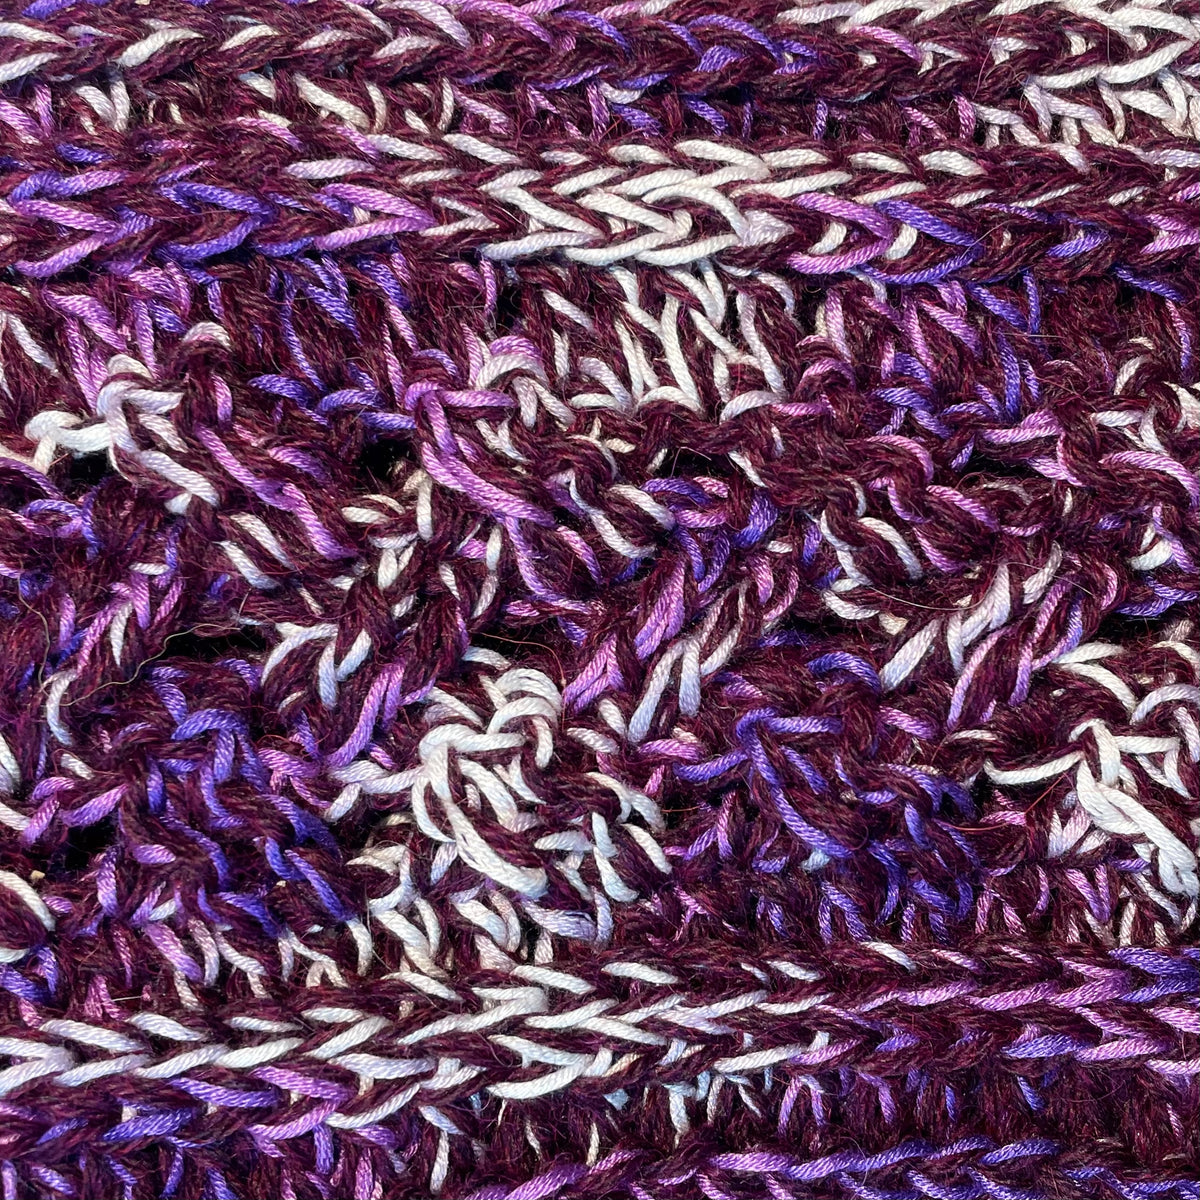 A close up photograph of the warm cozy handmade knit crochet Alpacas of Montana scarf, a mixture of deep purple, bright violet, and white.